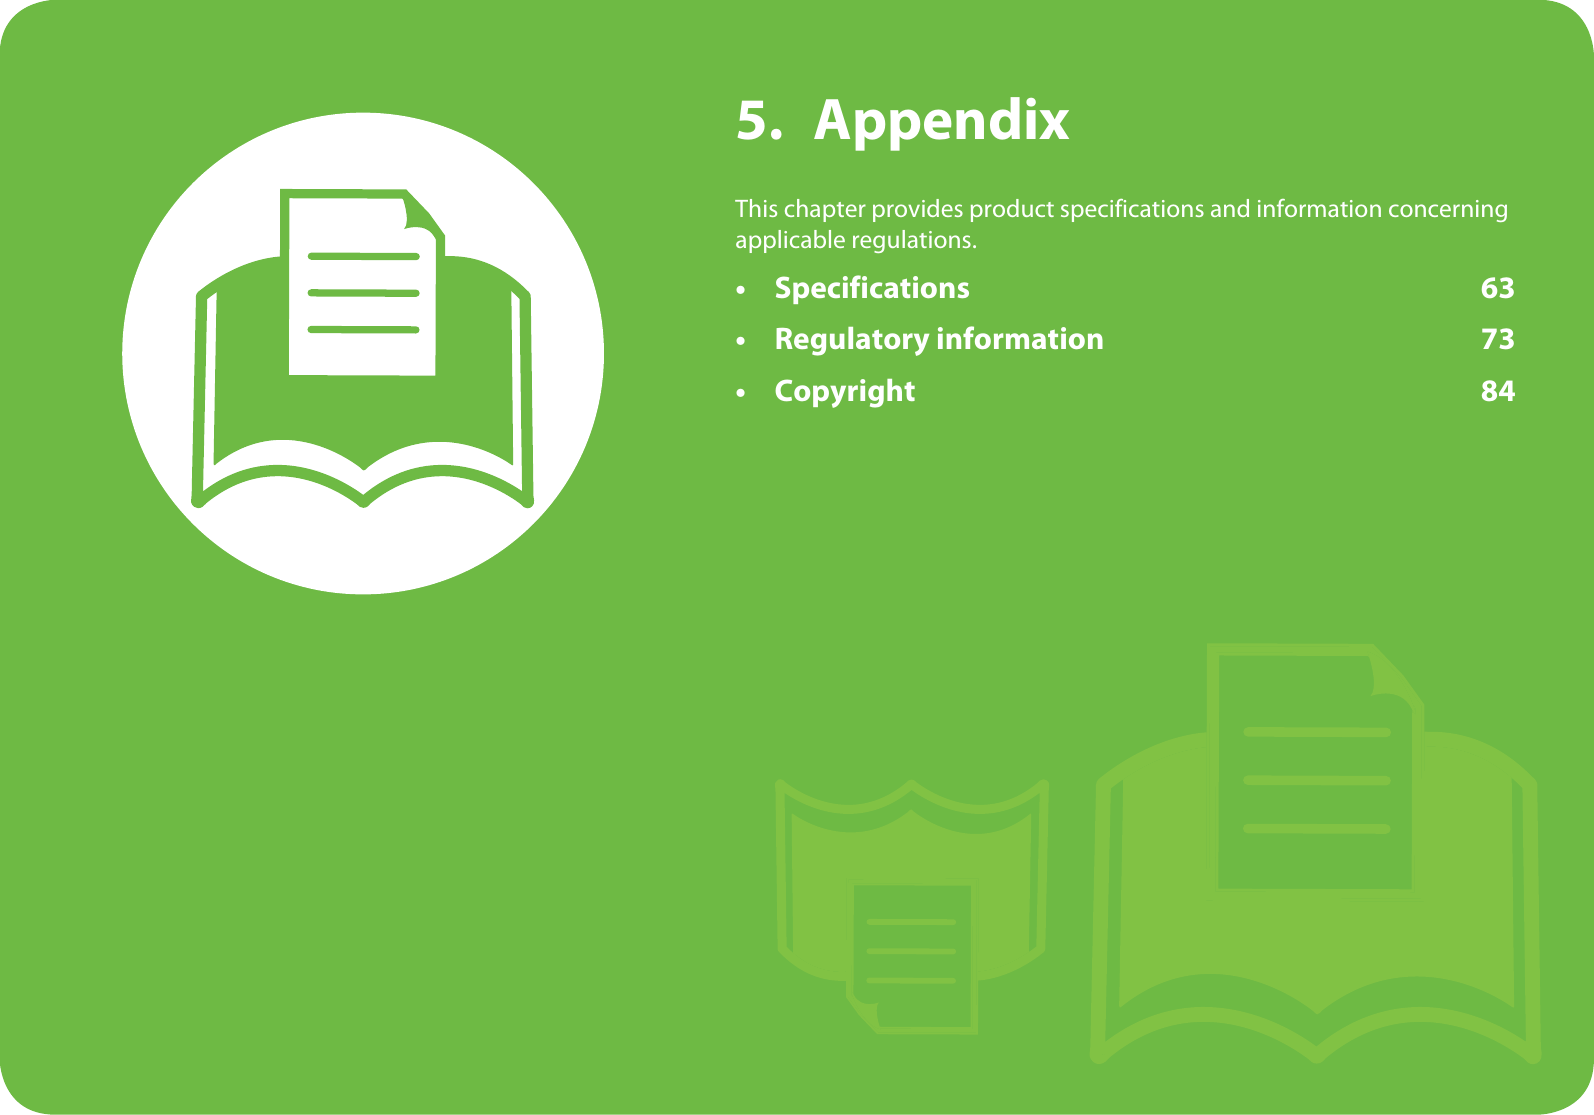 5. AppendixThis chapter provides product specifications and information concerning applicable regulations.•Specifications 63• Regulatory information 73•Copyright 84